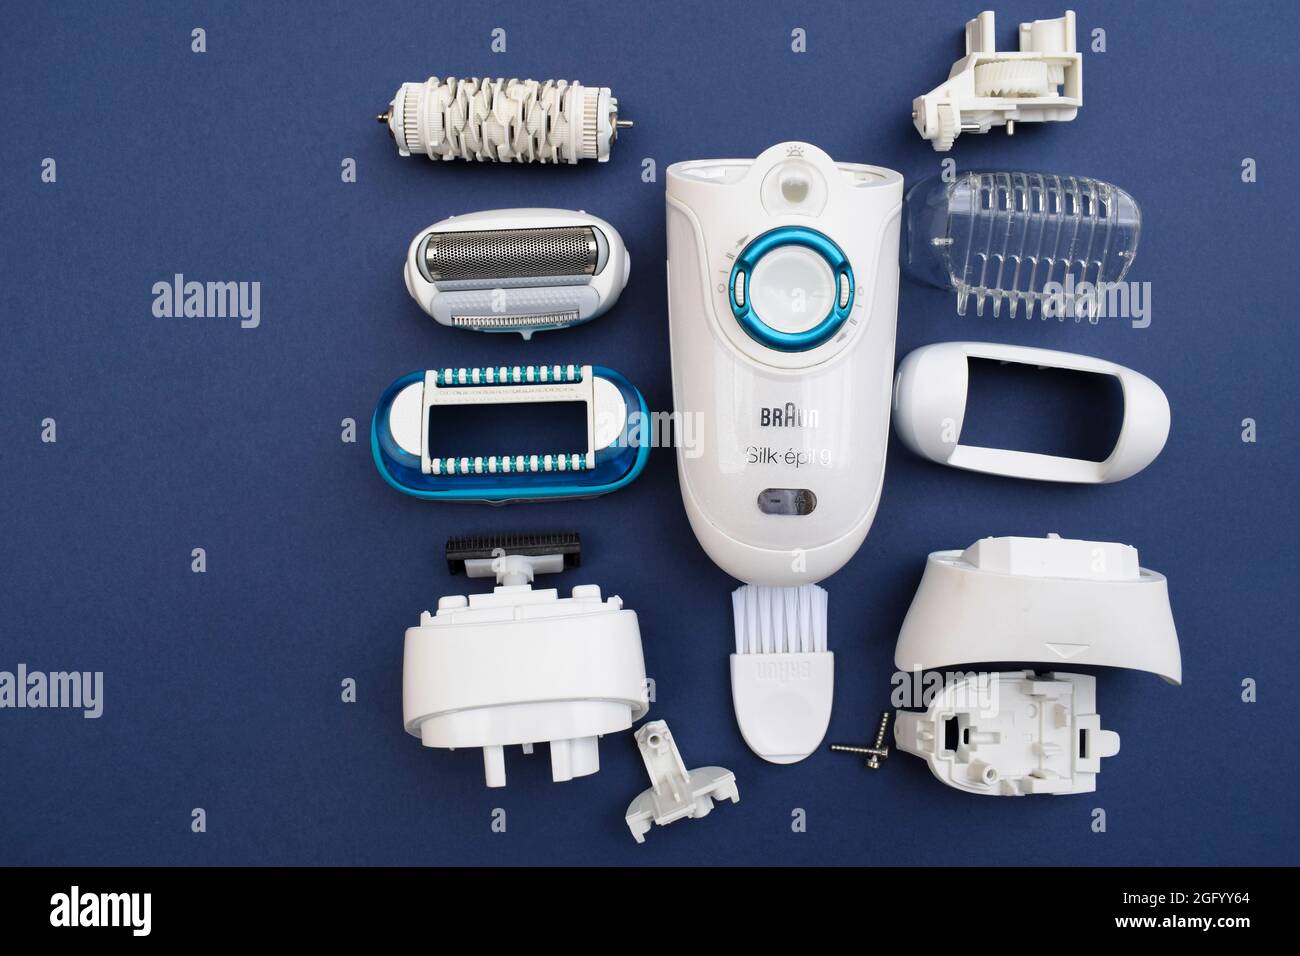 https://c8.alamy.com/comp/2GFYY64/braun-epilator-for-women-with-many-parts-it-is-opened-and-repaired-unscrewed-for-cleaning-purpose-many-parts-of-epilator-with-razor-combo-2GFYY64.jpg